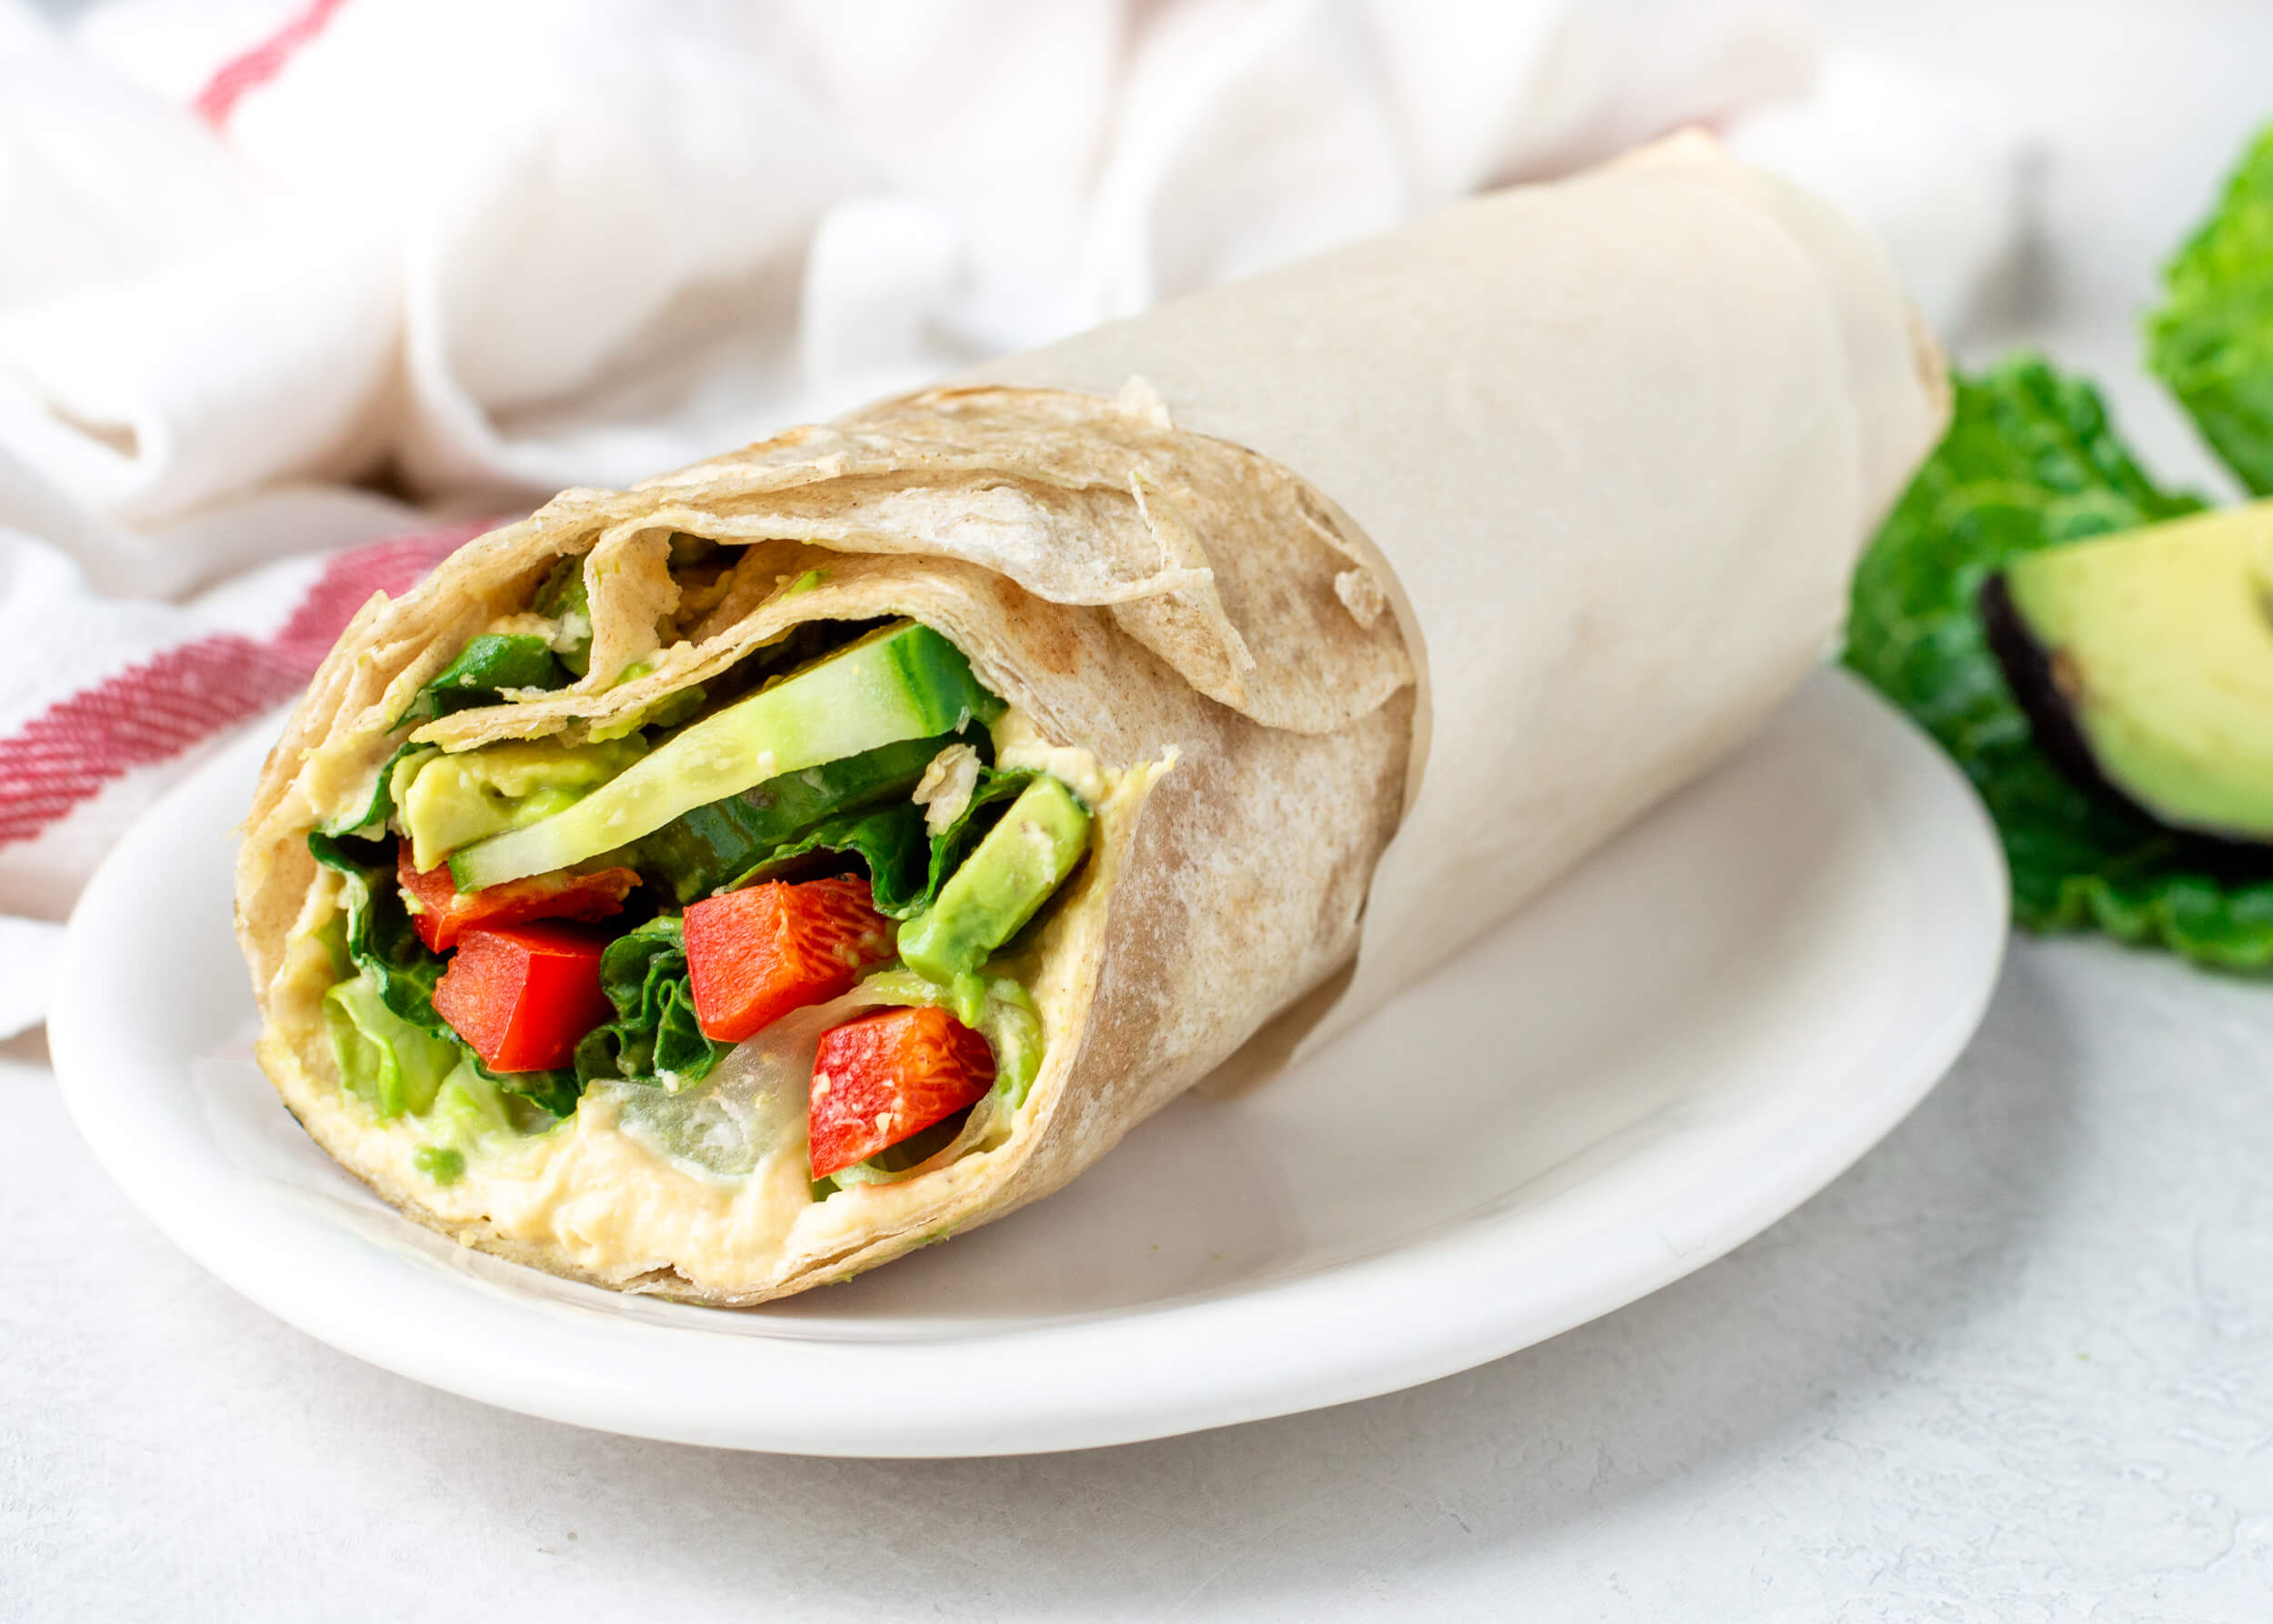 20 Family-Friendly Meals Your Clients Will Love: Hummus & Veggie Wrap